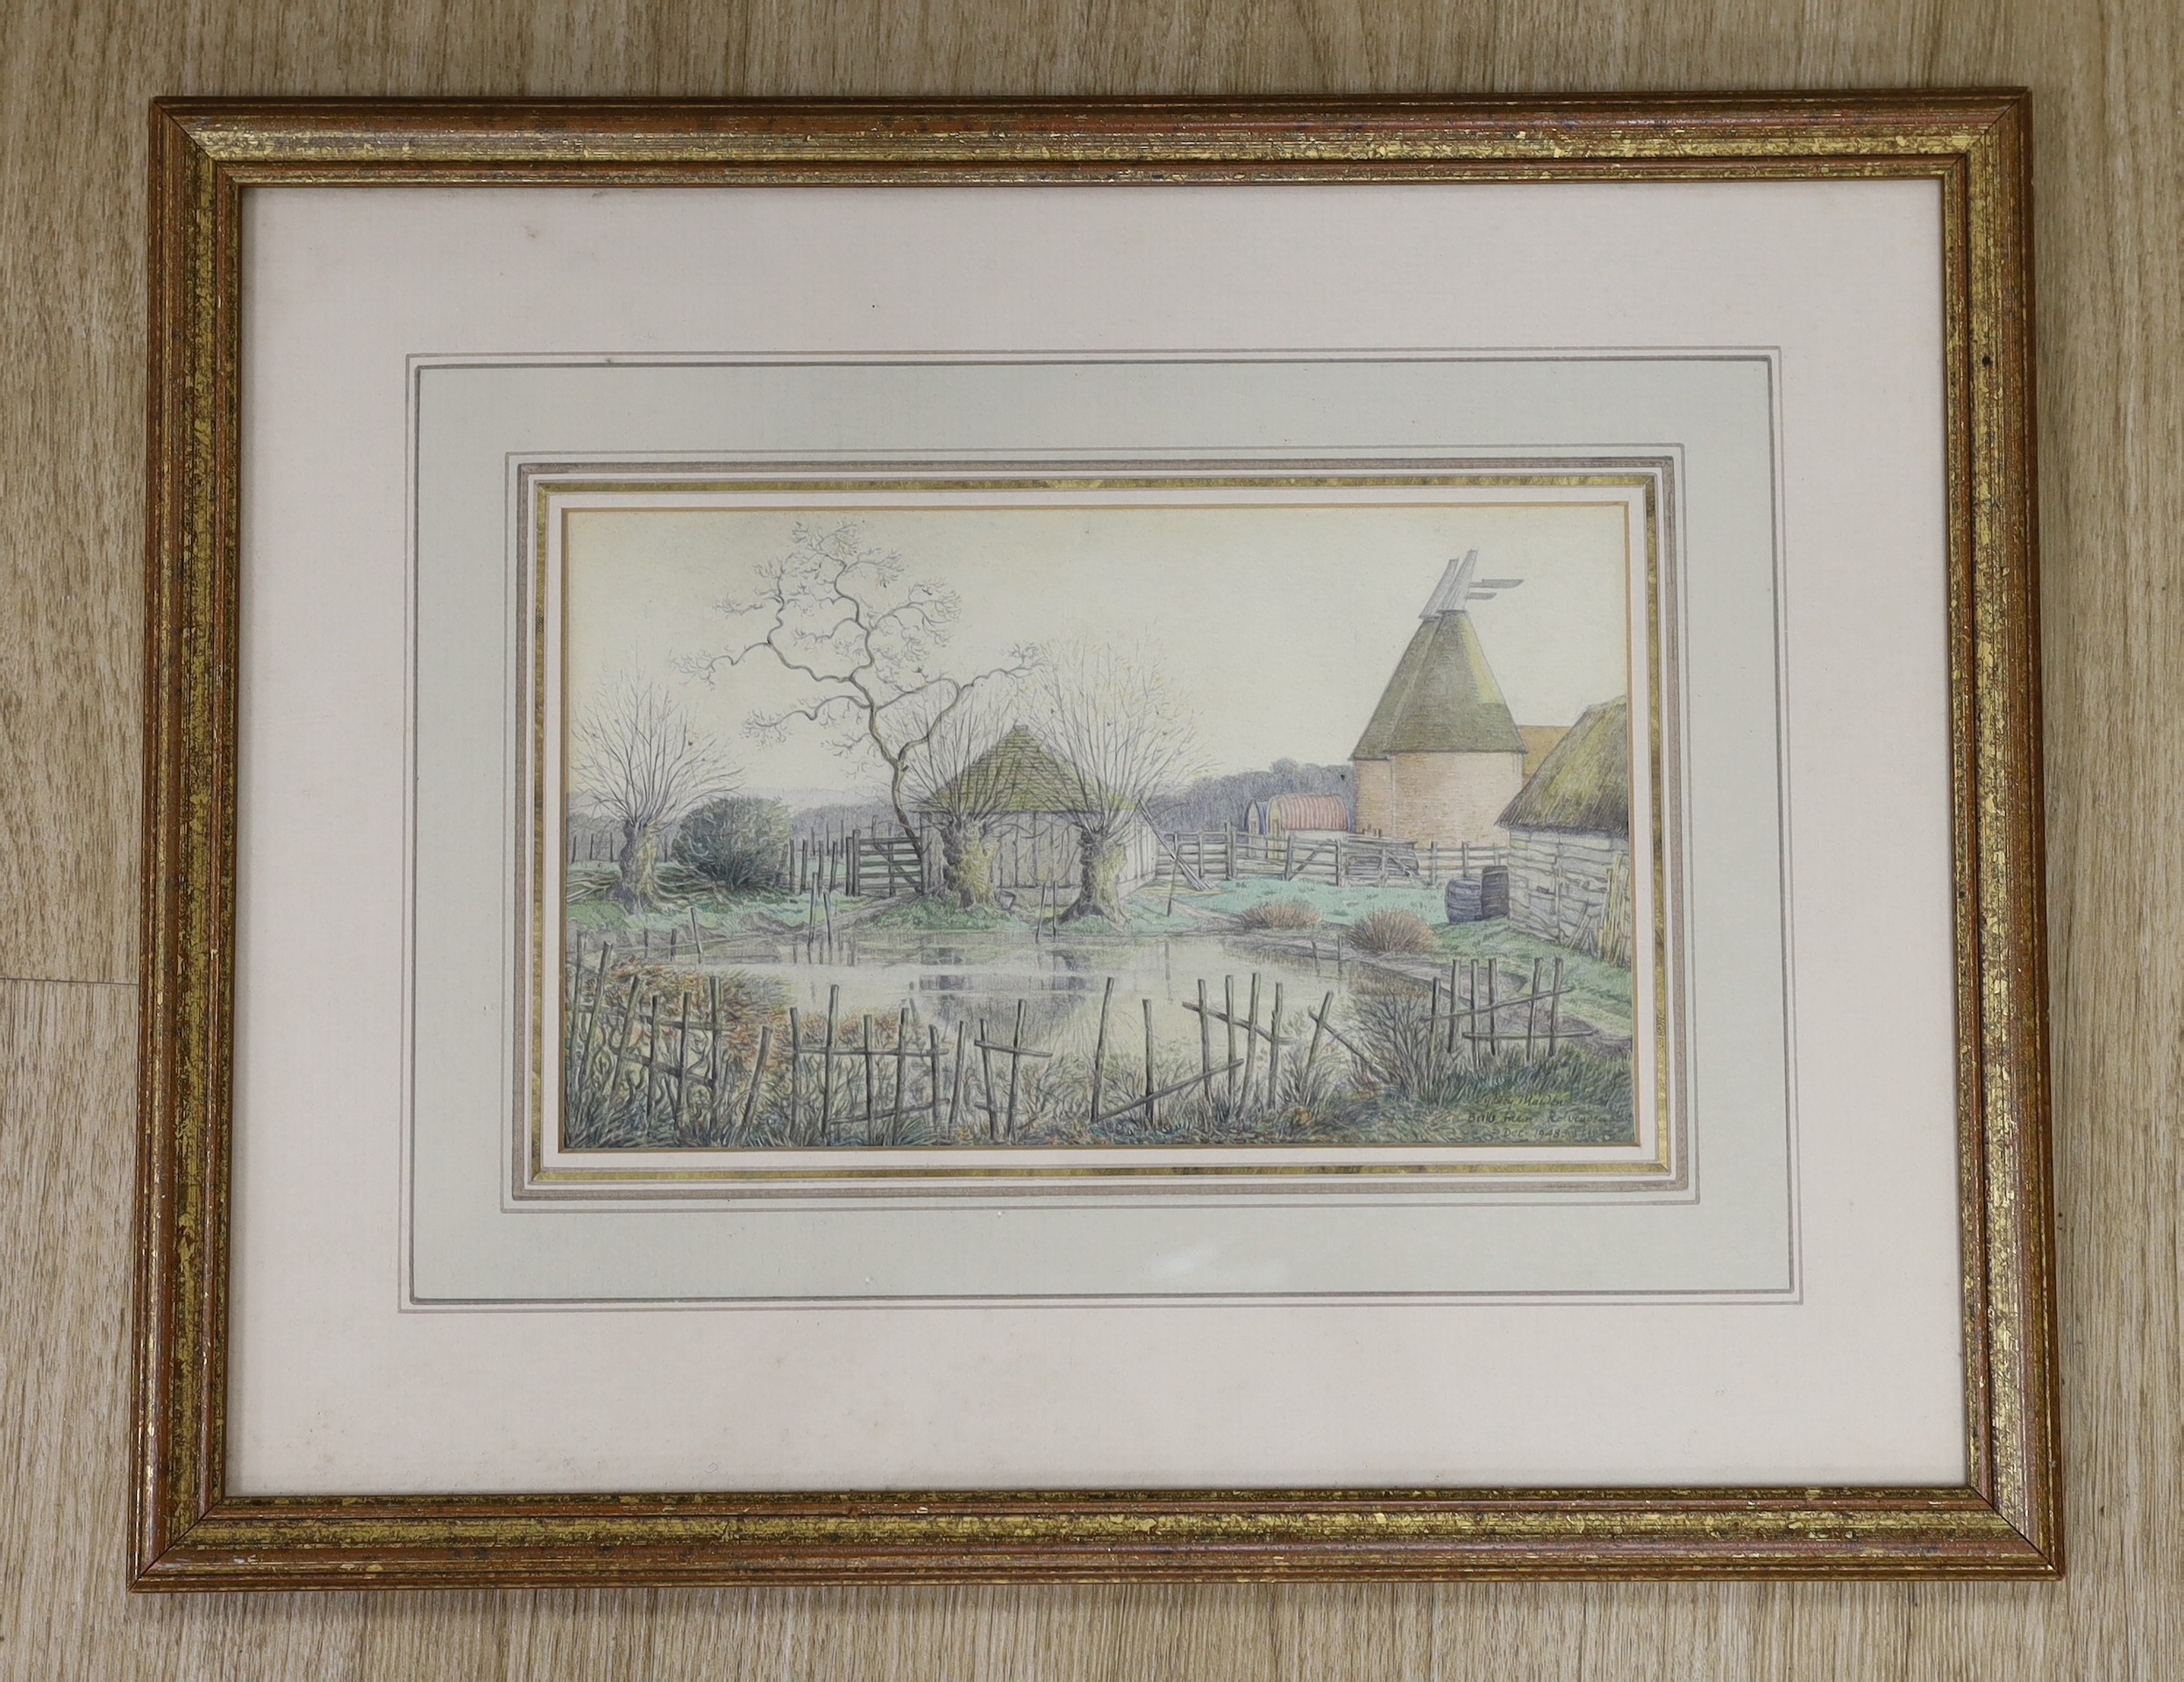 Sydney Maiden (1893-1963), watercolour, 'Bulls Farm, Rolvenden', signed and dated 1948, 15 x 25cm